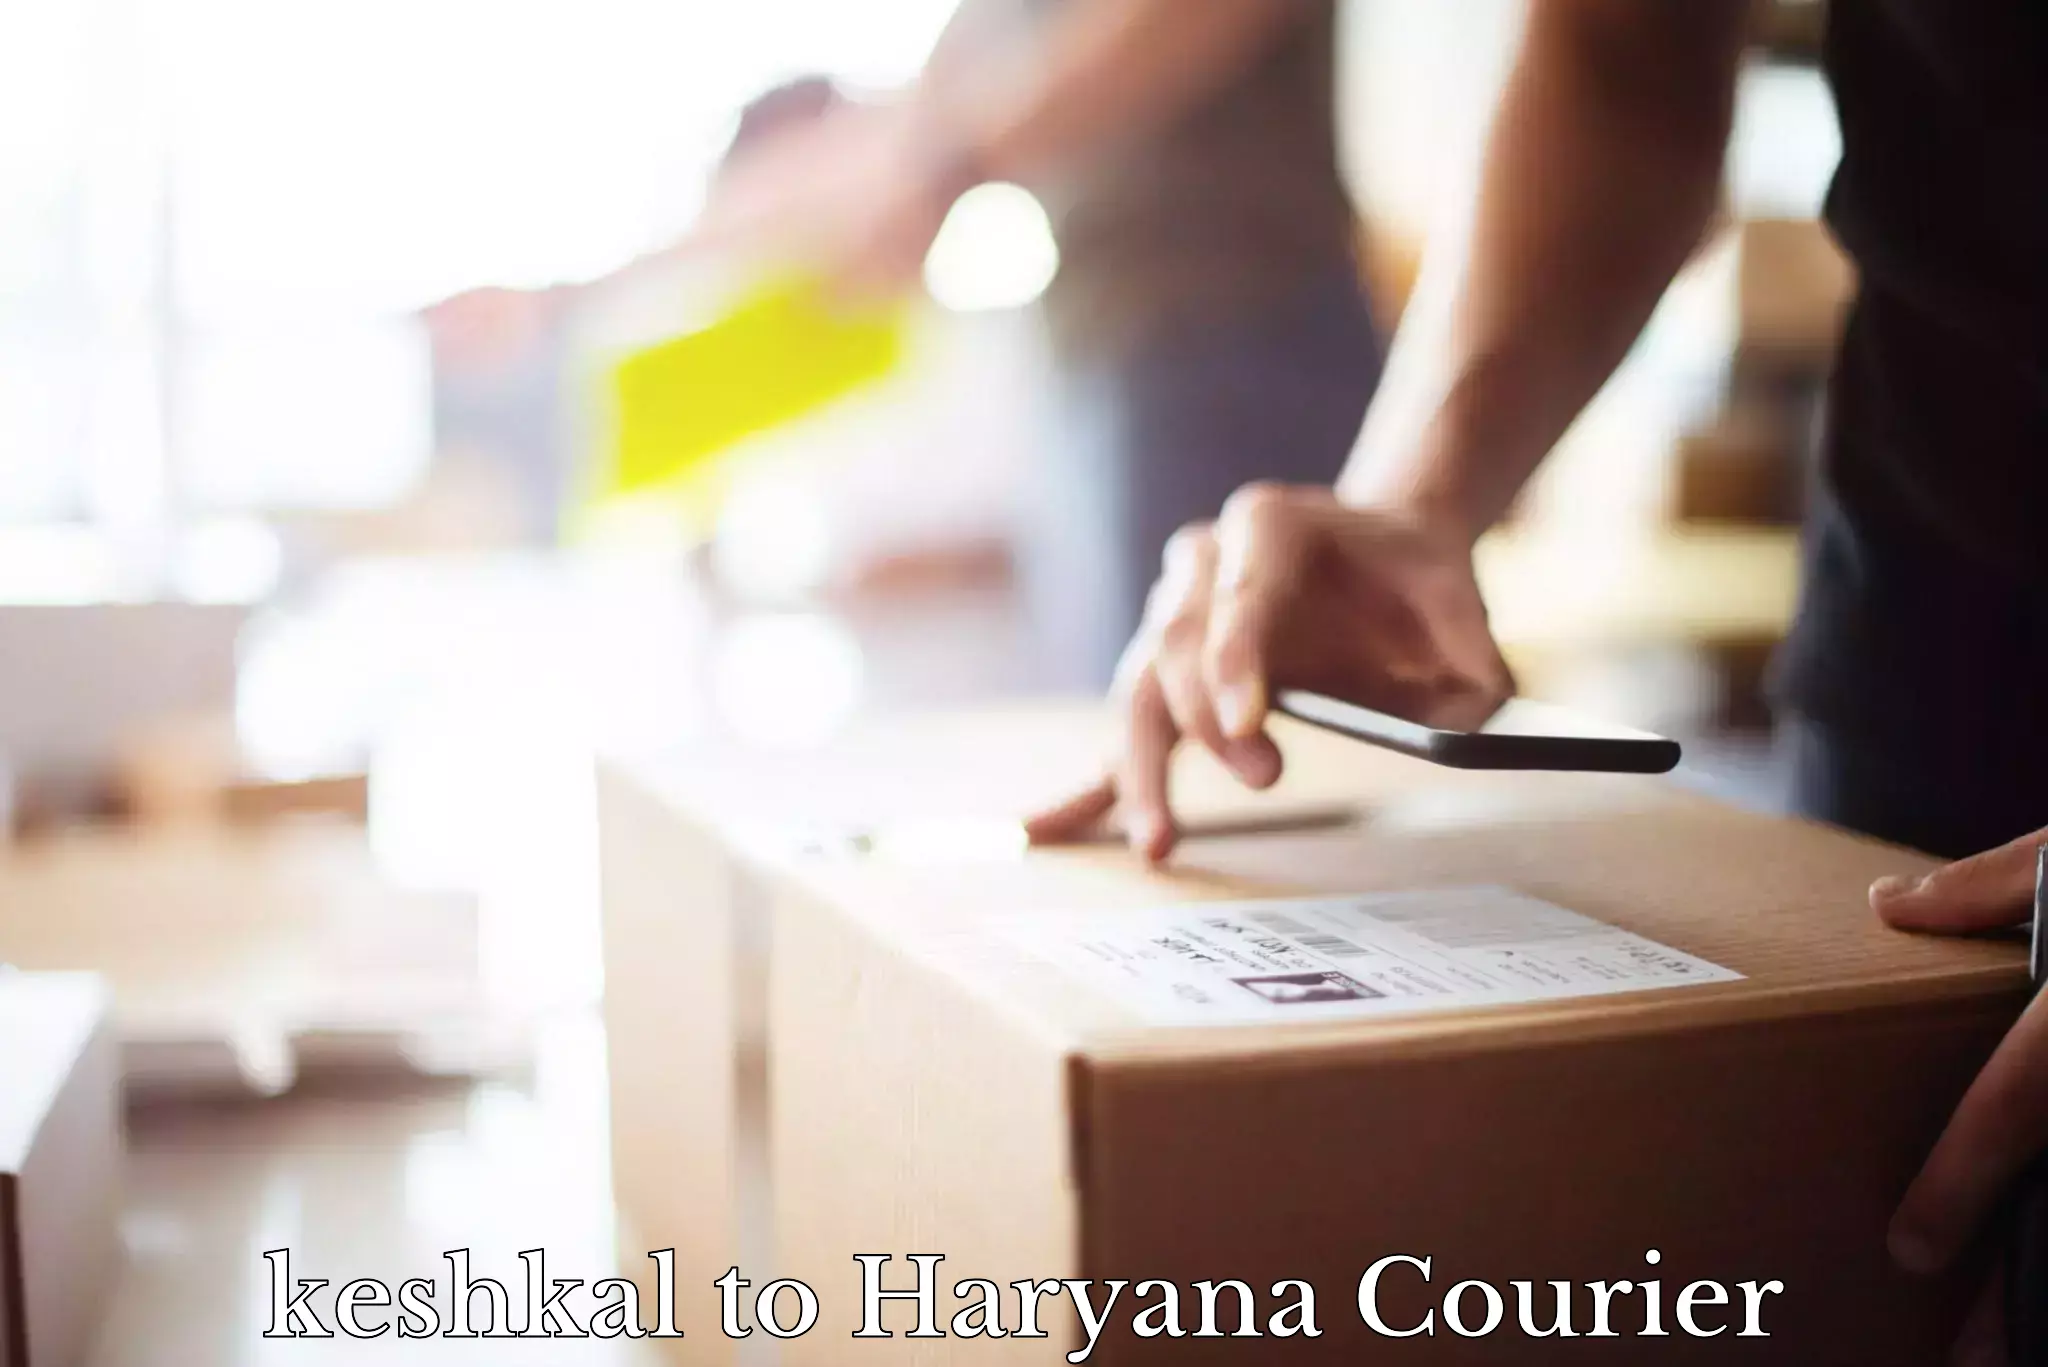 Customizable delivery plans keshkal to Haryana